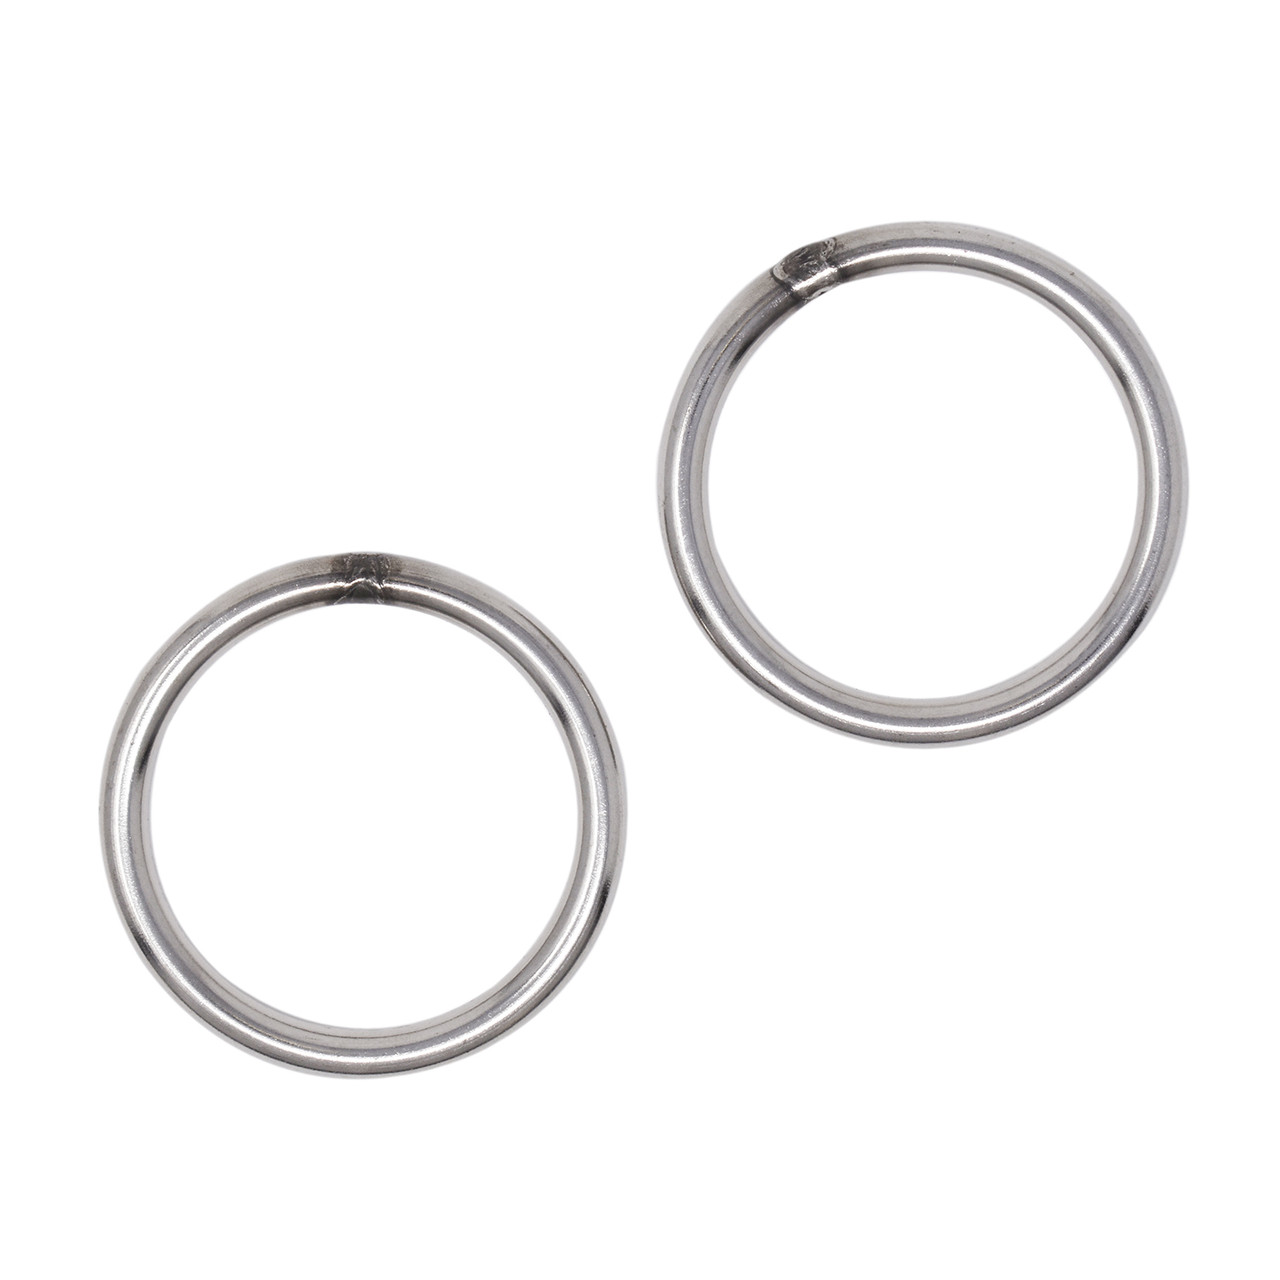 Scuba Diving 38mm Stainless Steel 2.3mm Split Ring for BCD attachment 10pc Pack 